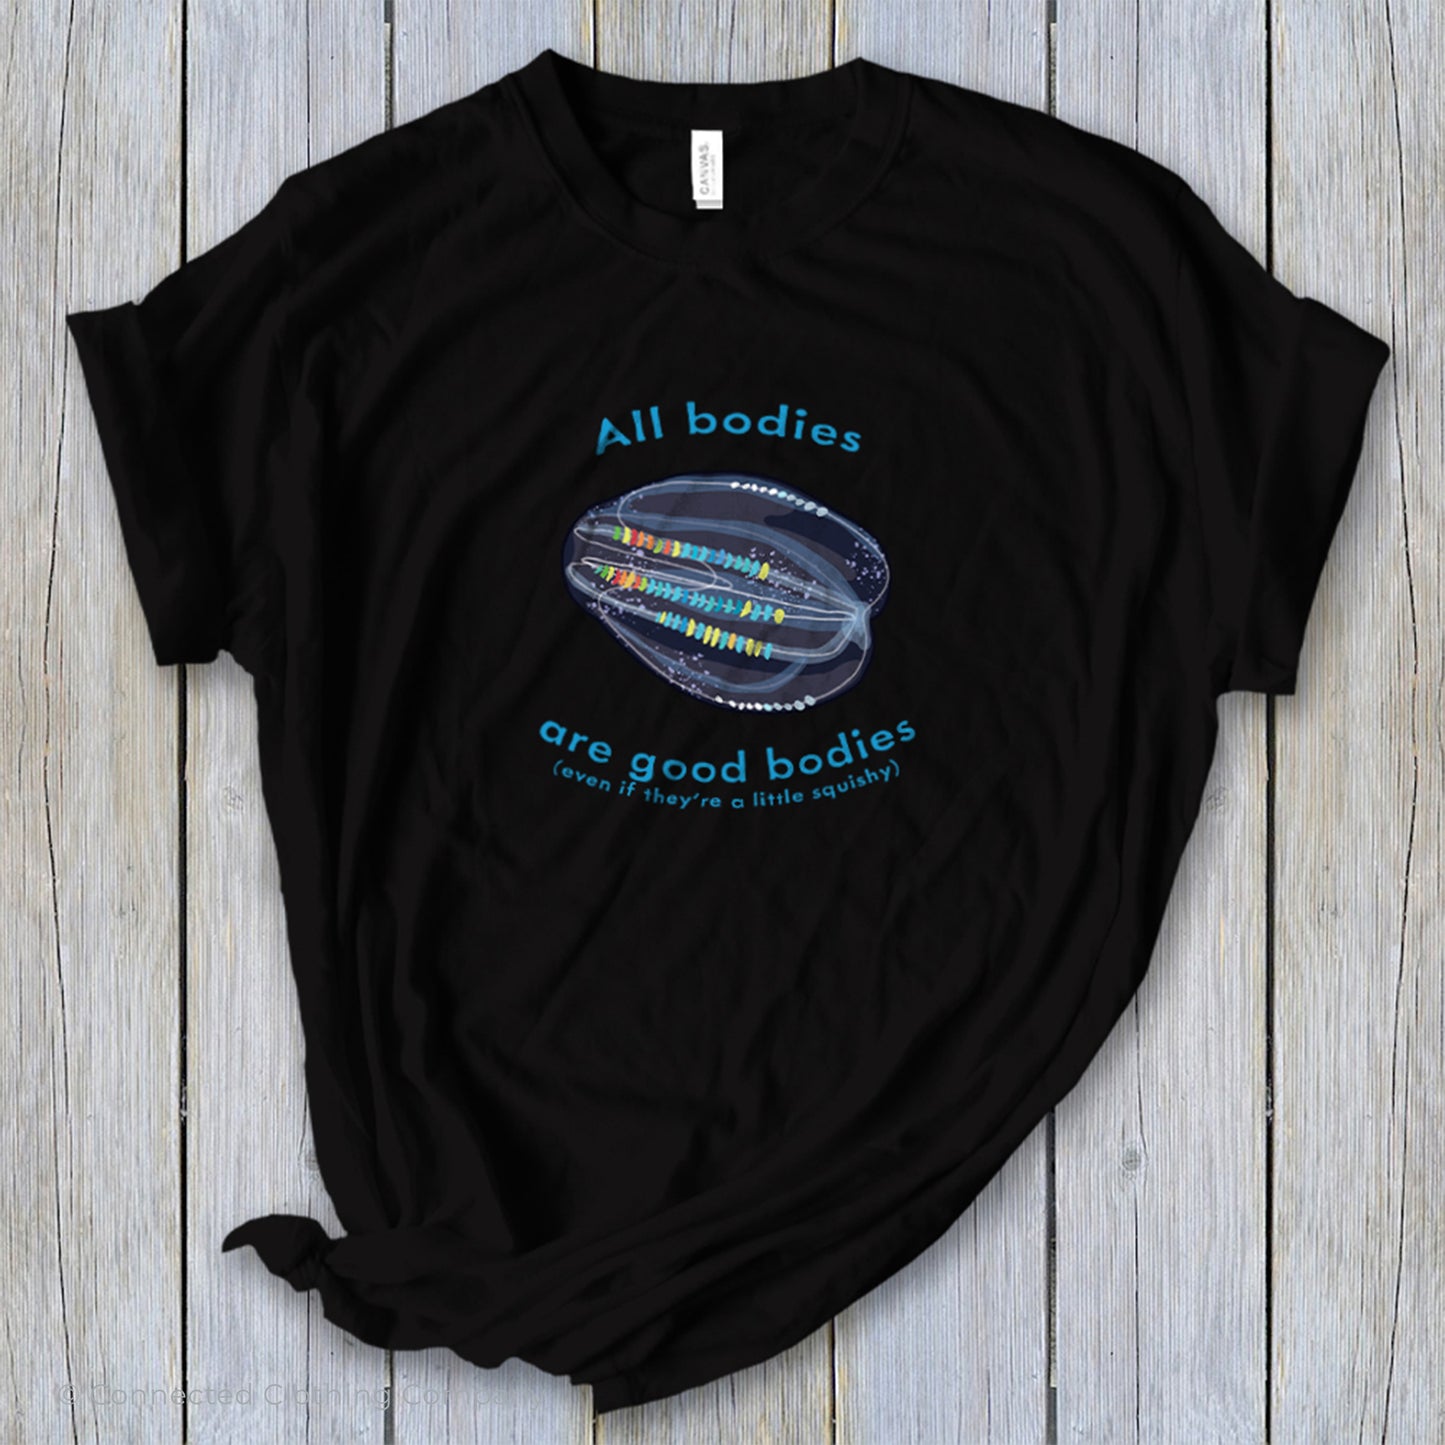 Black All Bodies Are Good Bodies Tee reads "All bodies are good bodies (even if they're a little squishy)." and has a comb jelly ctenophore illustration - Connected Clothing Company - Ethically and Sustainably Made - 10% donated to Mission Blue ocean conservation